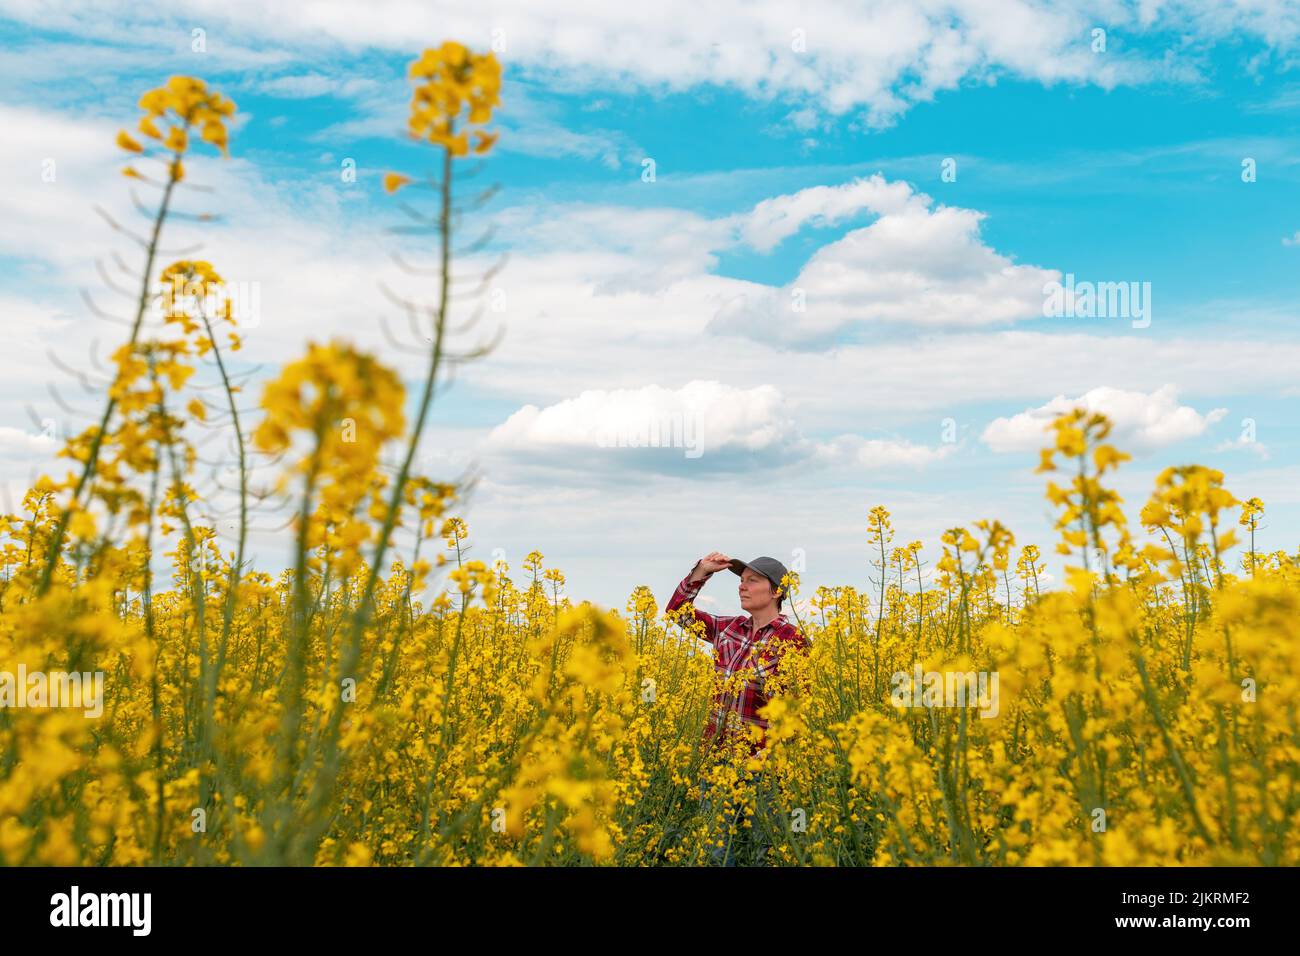 Female farm worker wearing red plaid shirt and trucker's hat standing in cultivated rapeseed field in bloom and looking over crops, selective focus Stock Photo